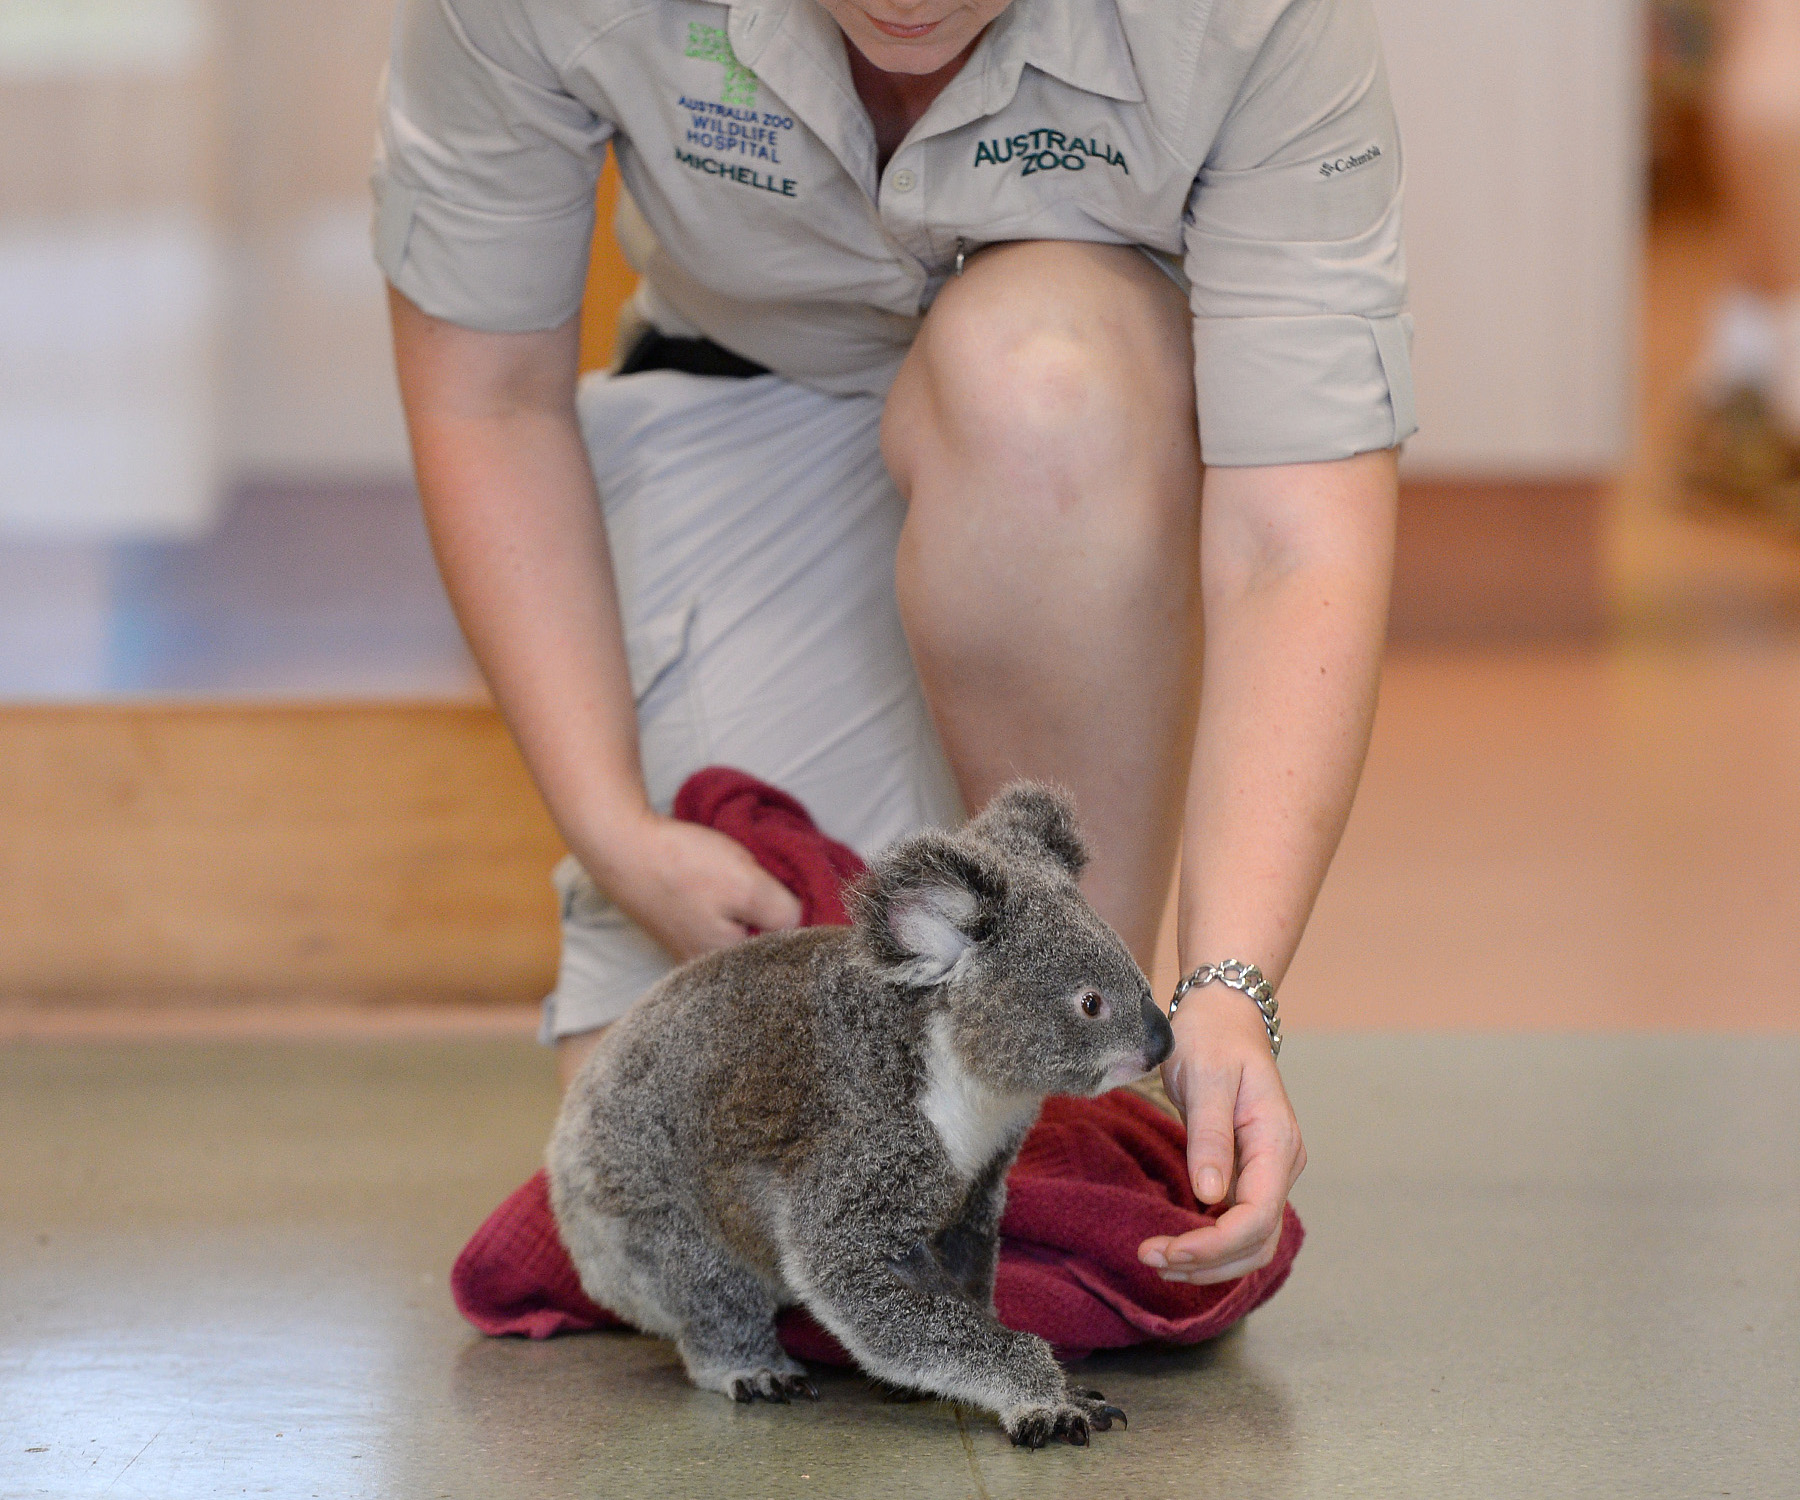 Peta the koala crawls for the first time since being hit by car